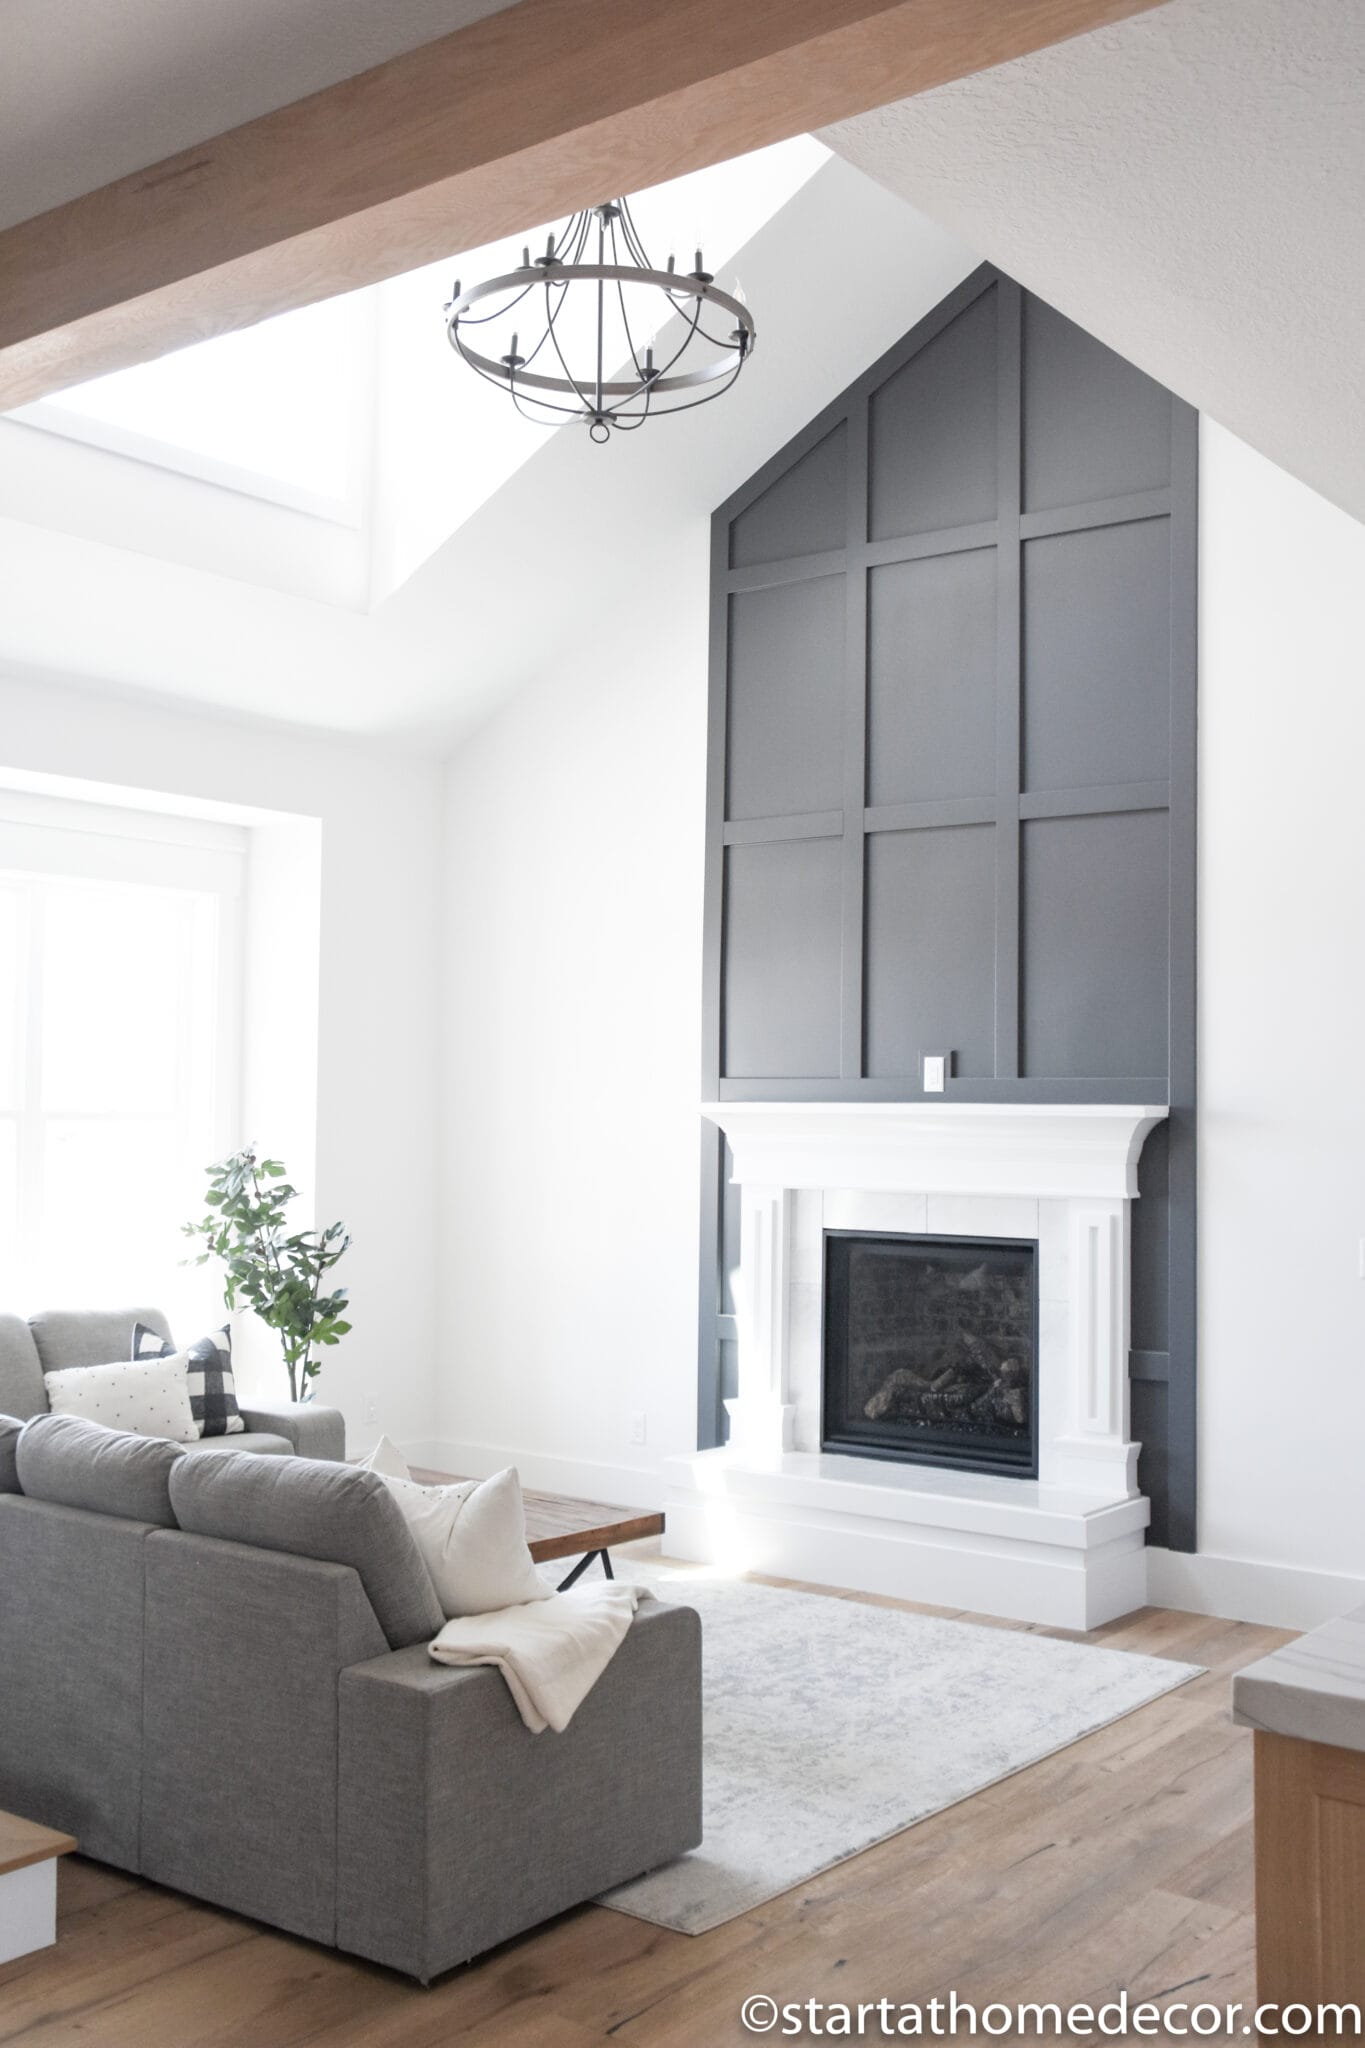 tall geometric millwork behind white fireplace